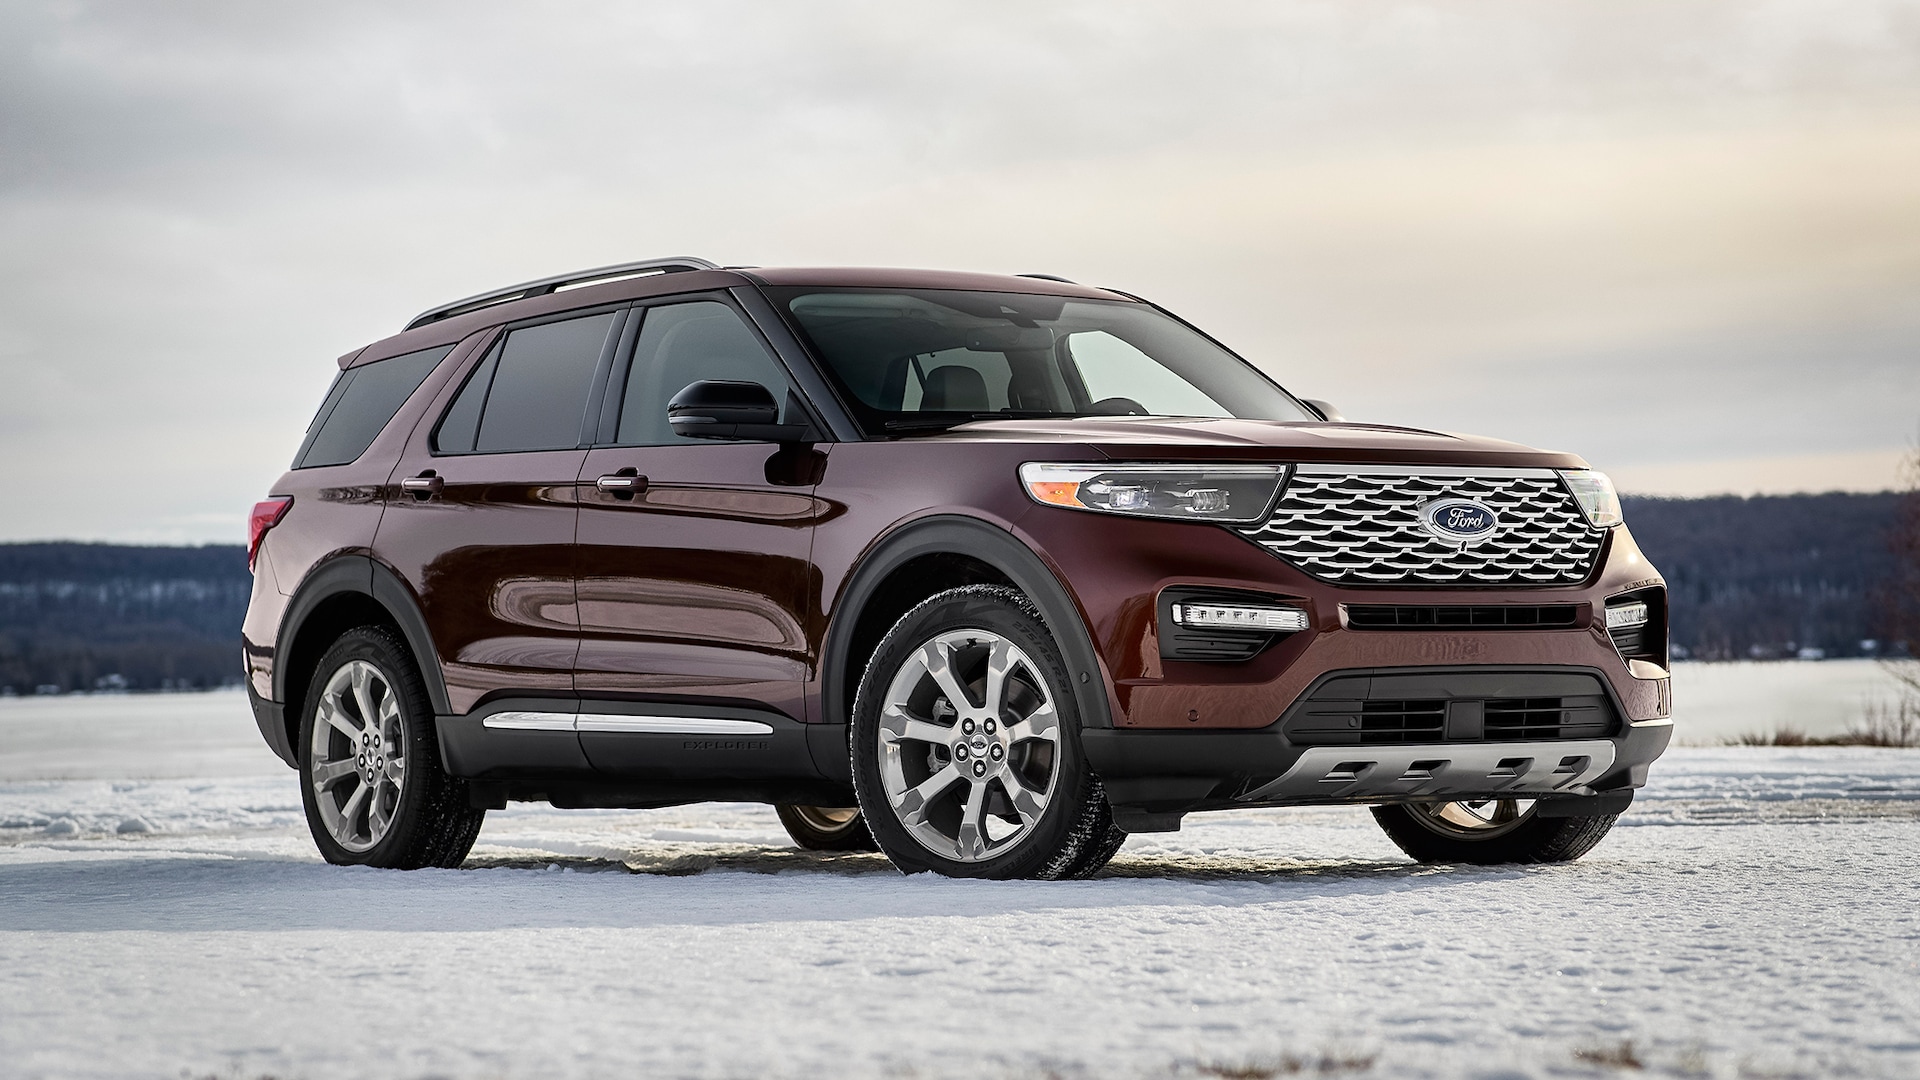 The 2020 Ford Explorer: This All-New SUV Will Help Save the Mustang